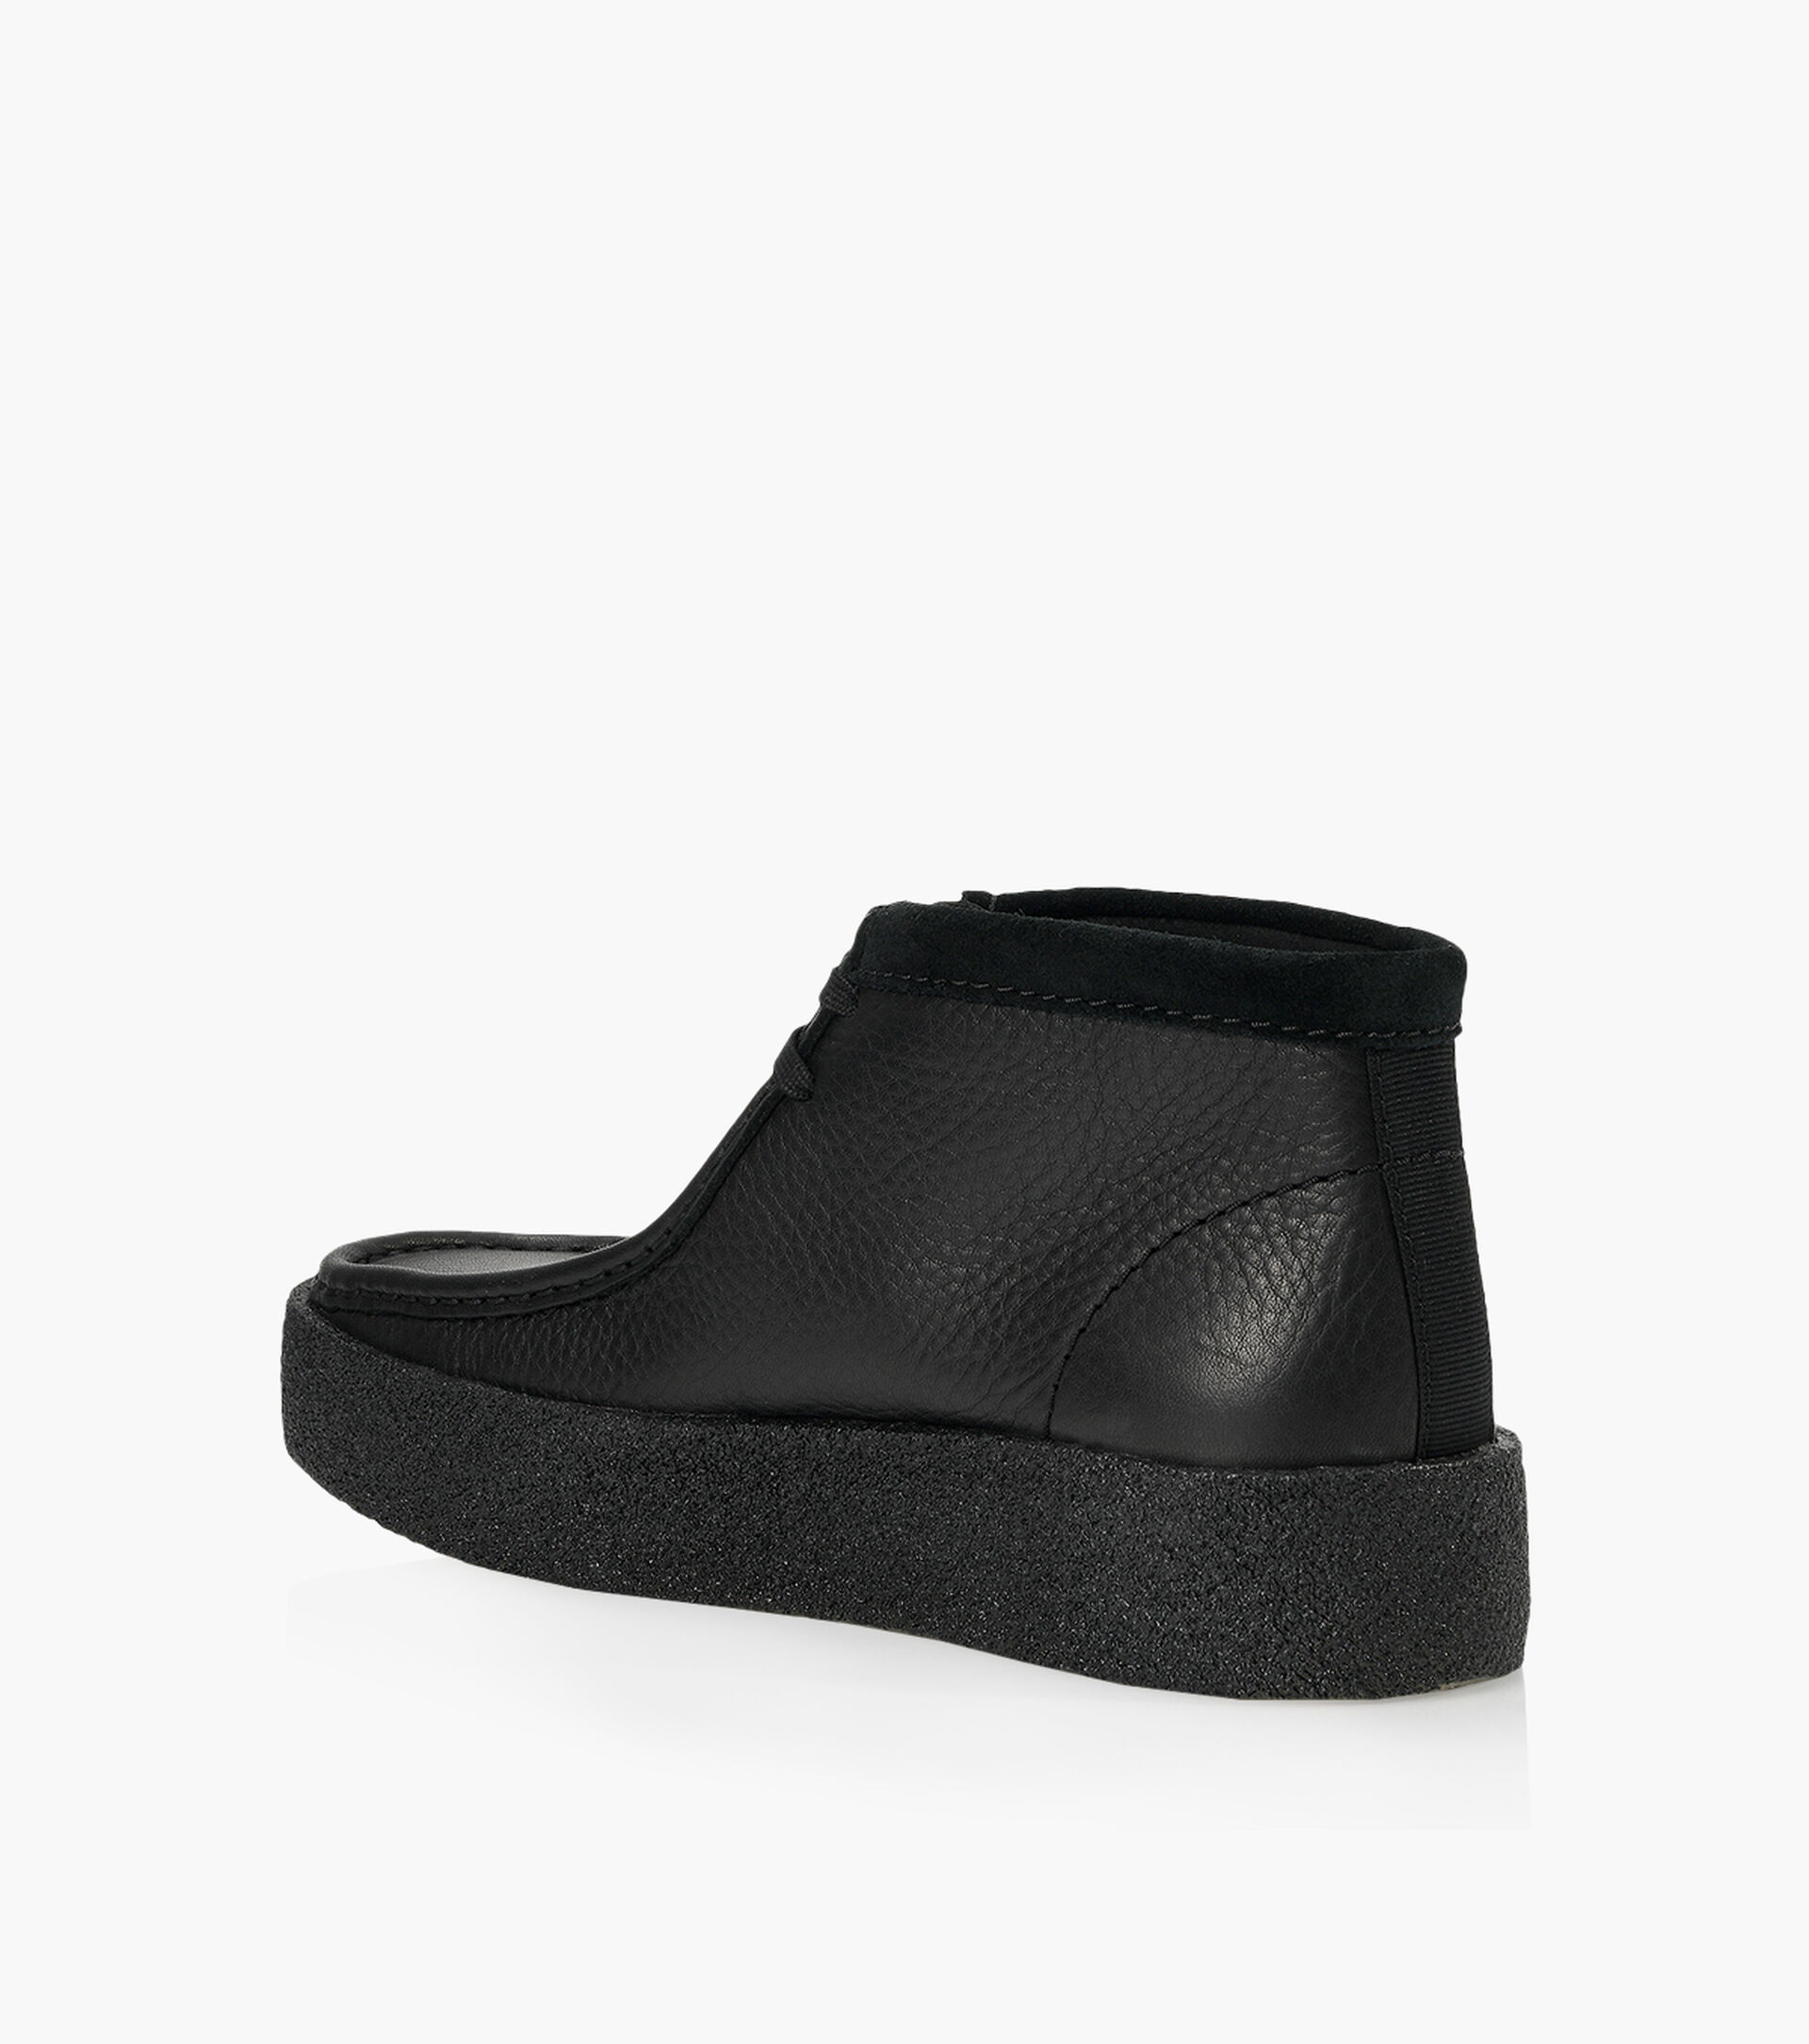 CLARKS WALLABEE CUP BT - Black Leather | Browns Shoes